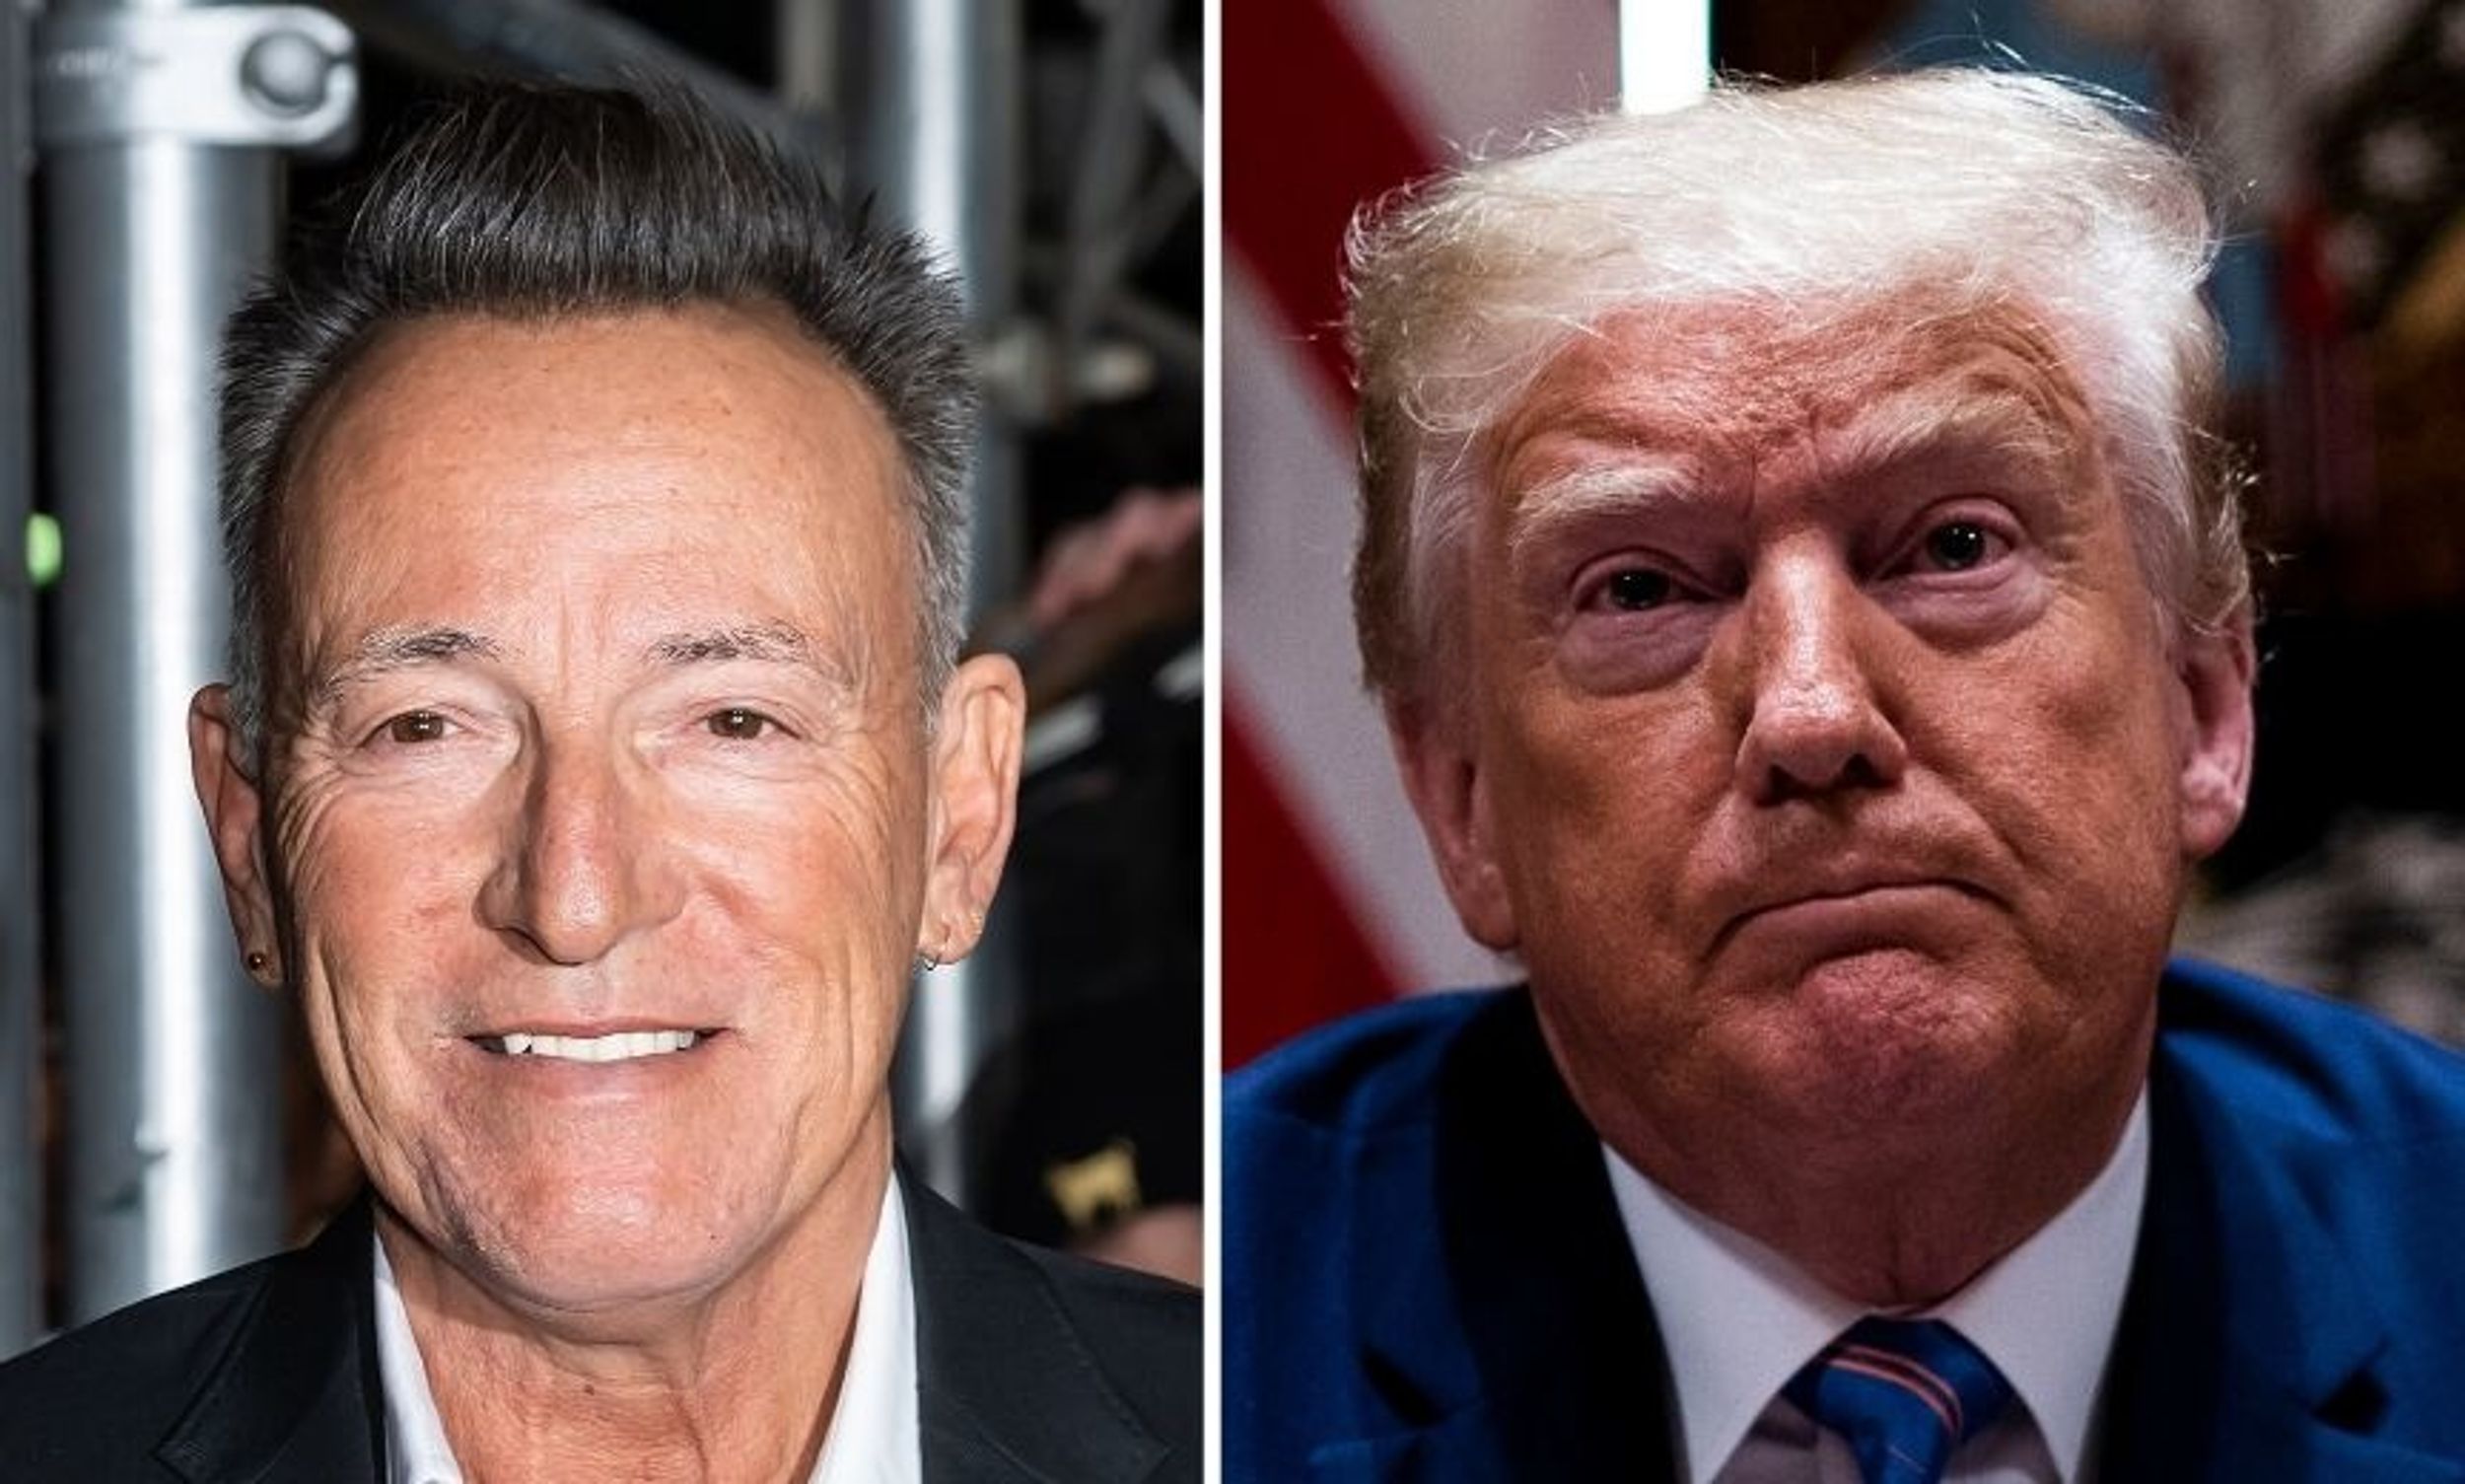 Bruce Springsteen Just Used His Sirius XM Radio Show to Drop an F-Bomb in Savage Message to Trump Over Pandemic Response